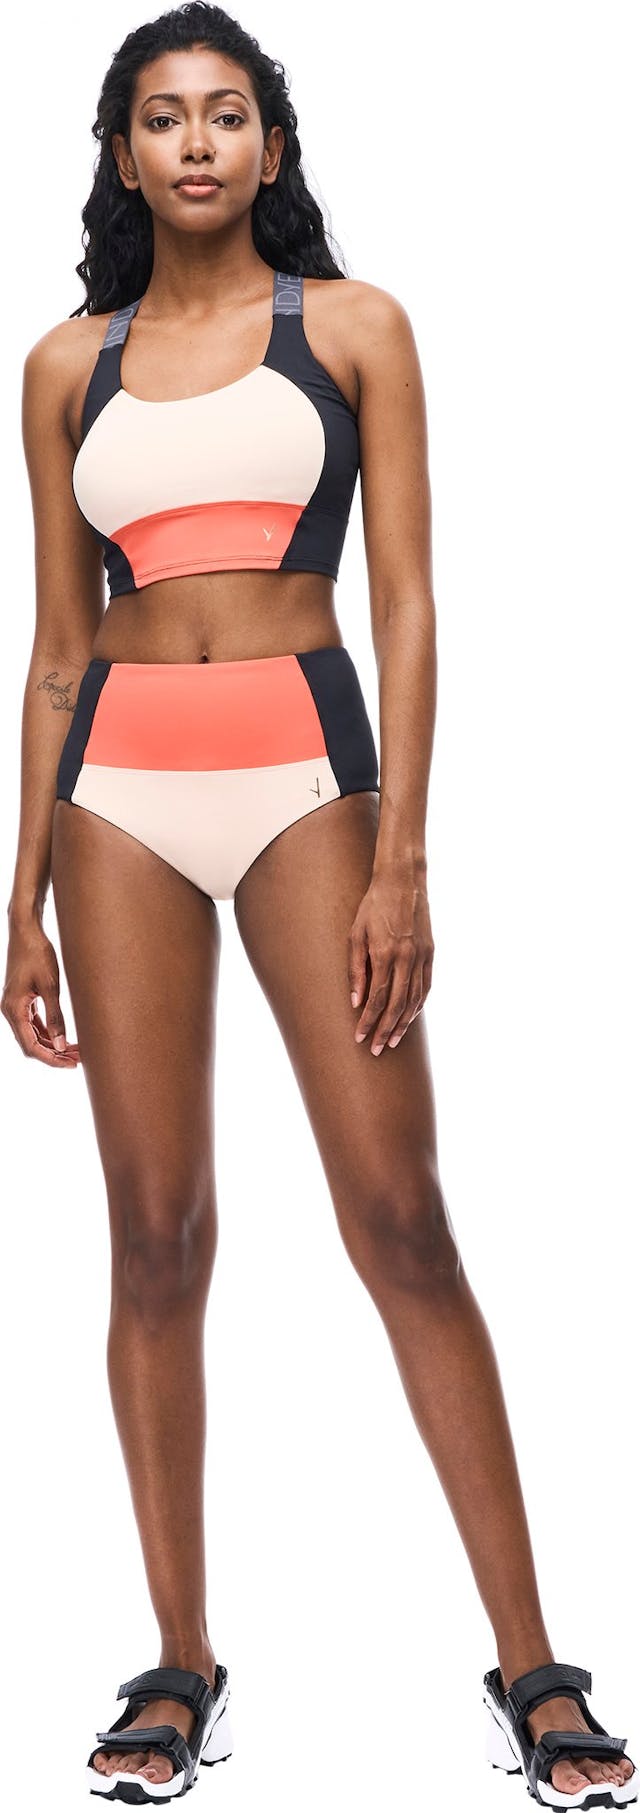 Product image for Timador Swim Top - Women's